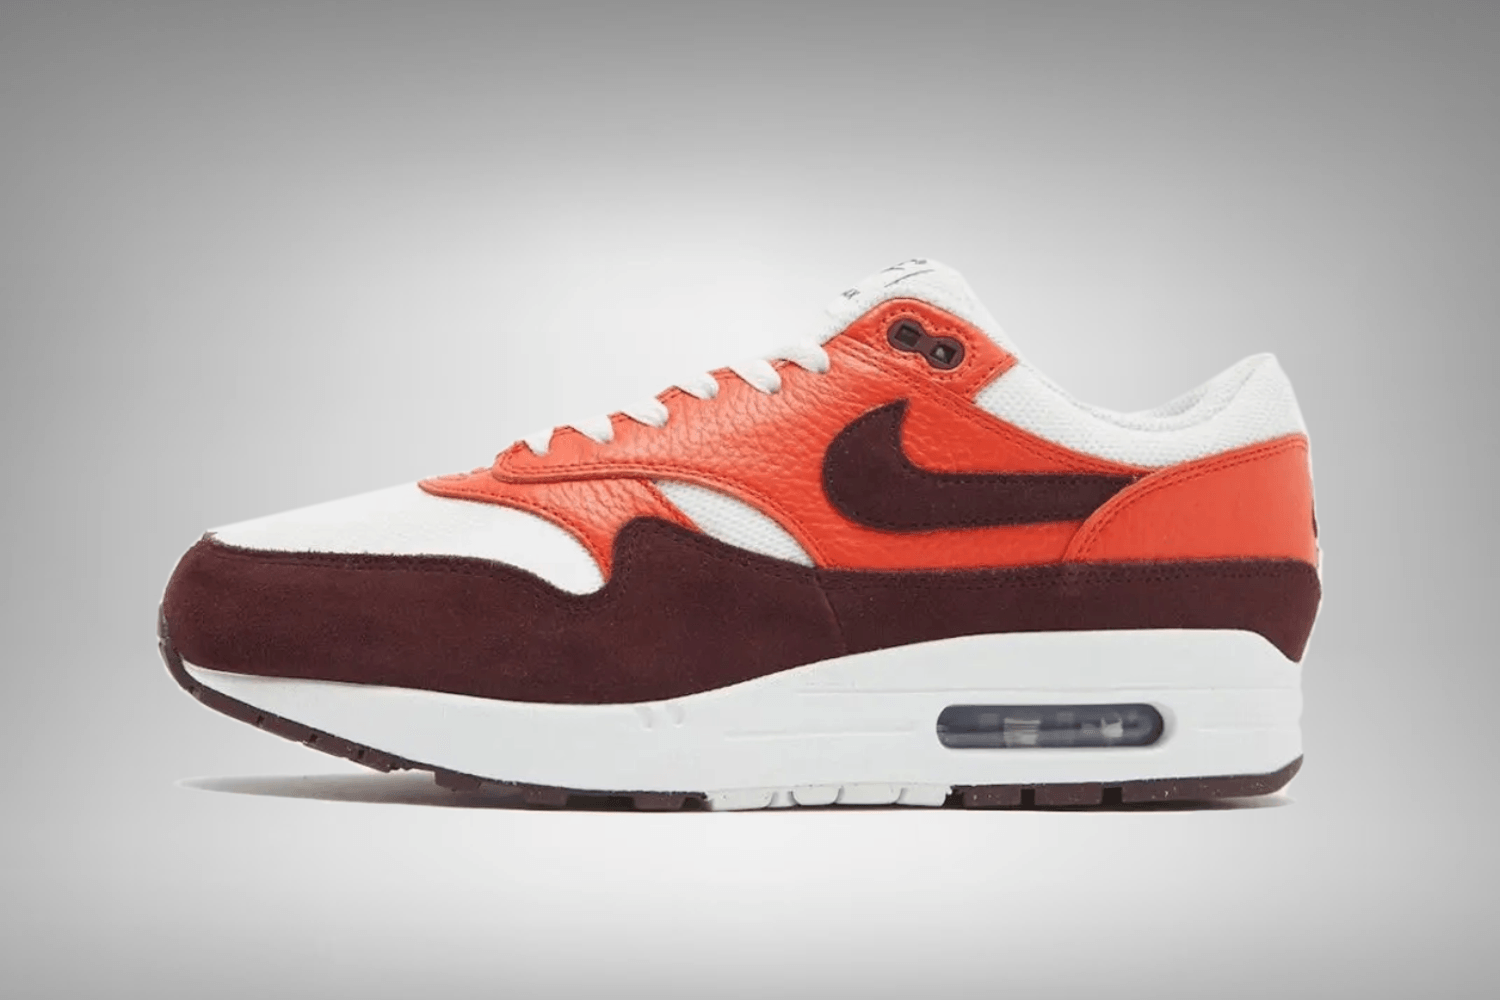 The Nike Air Max 1 'Burgundy Crush' is available exclusively at JD Sports